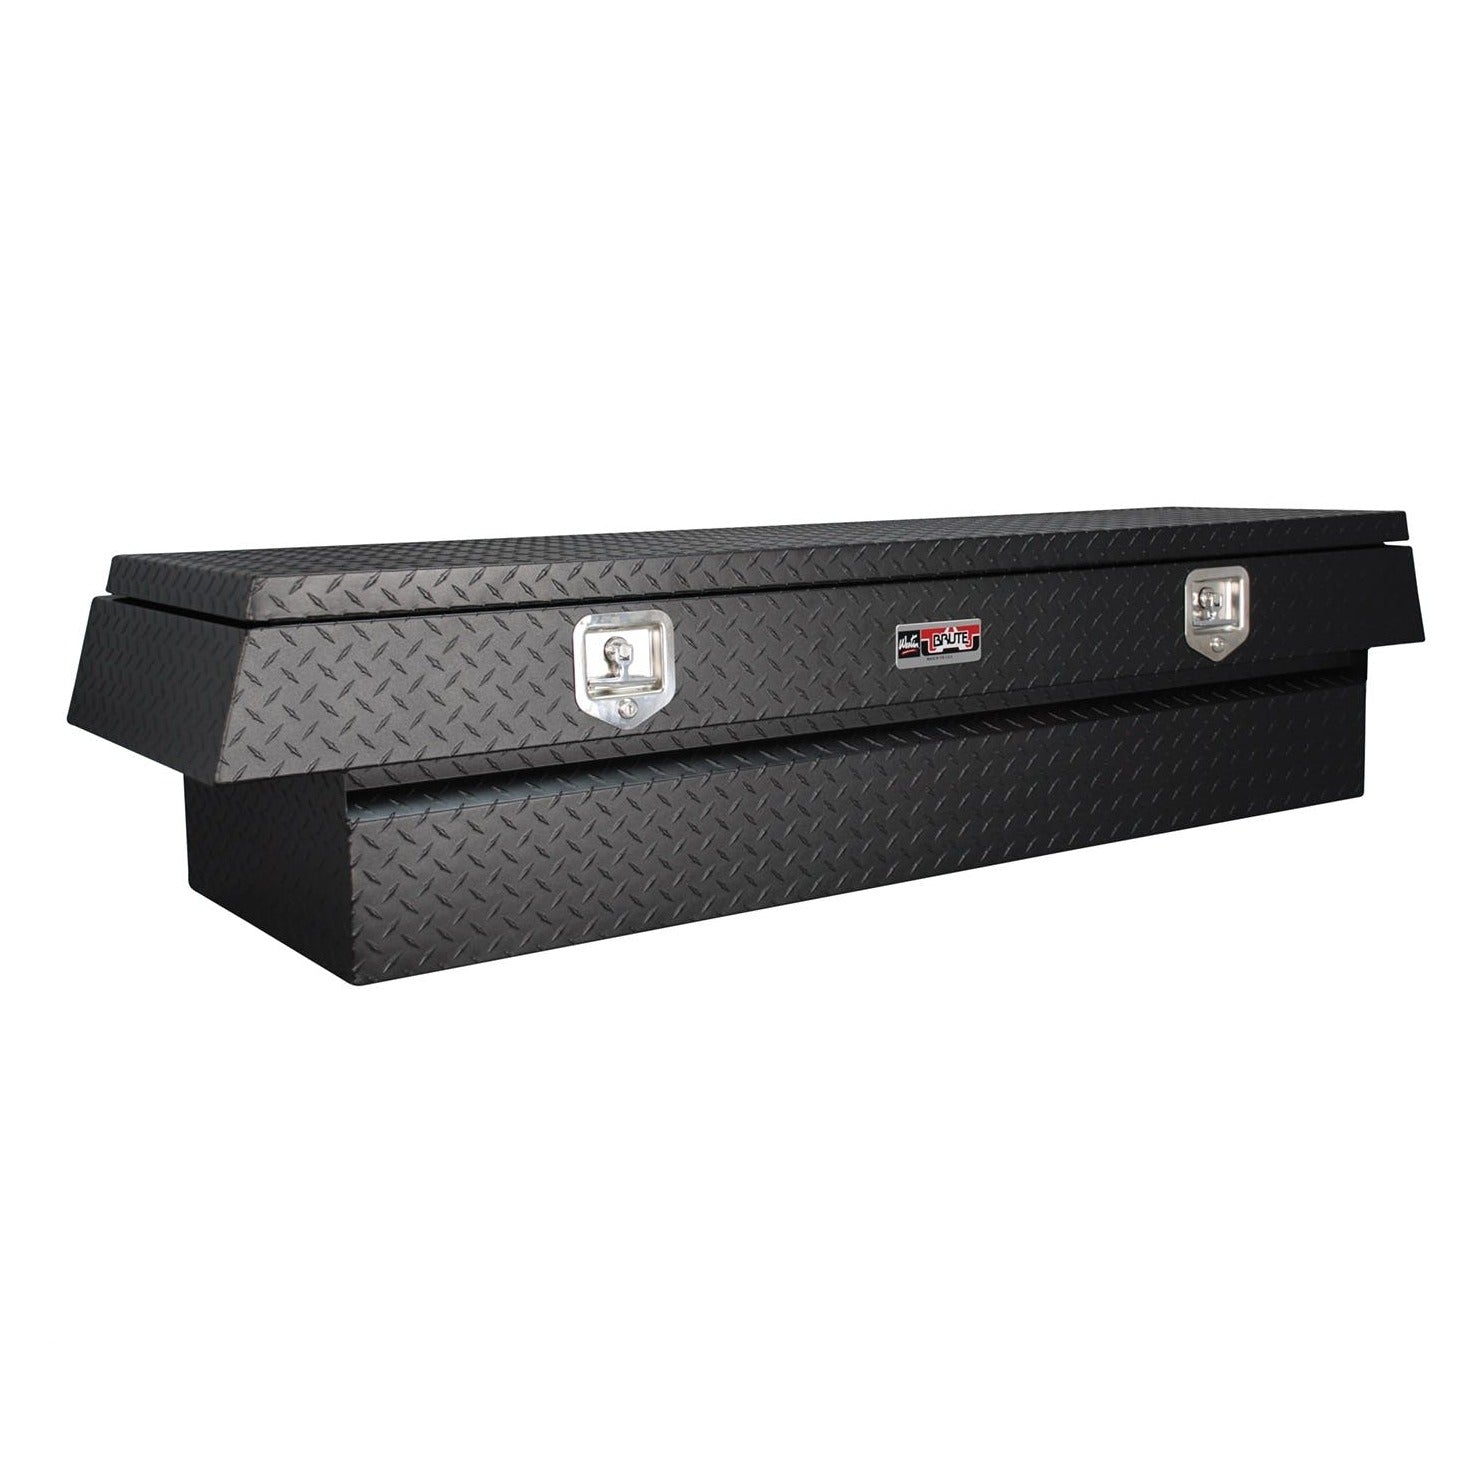 Westin Automotive 80-RB127FL-BT Full Lid Full Size XOver Standard Overall Dims: 71x20x18 In.; Base Dims 60x20x11